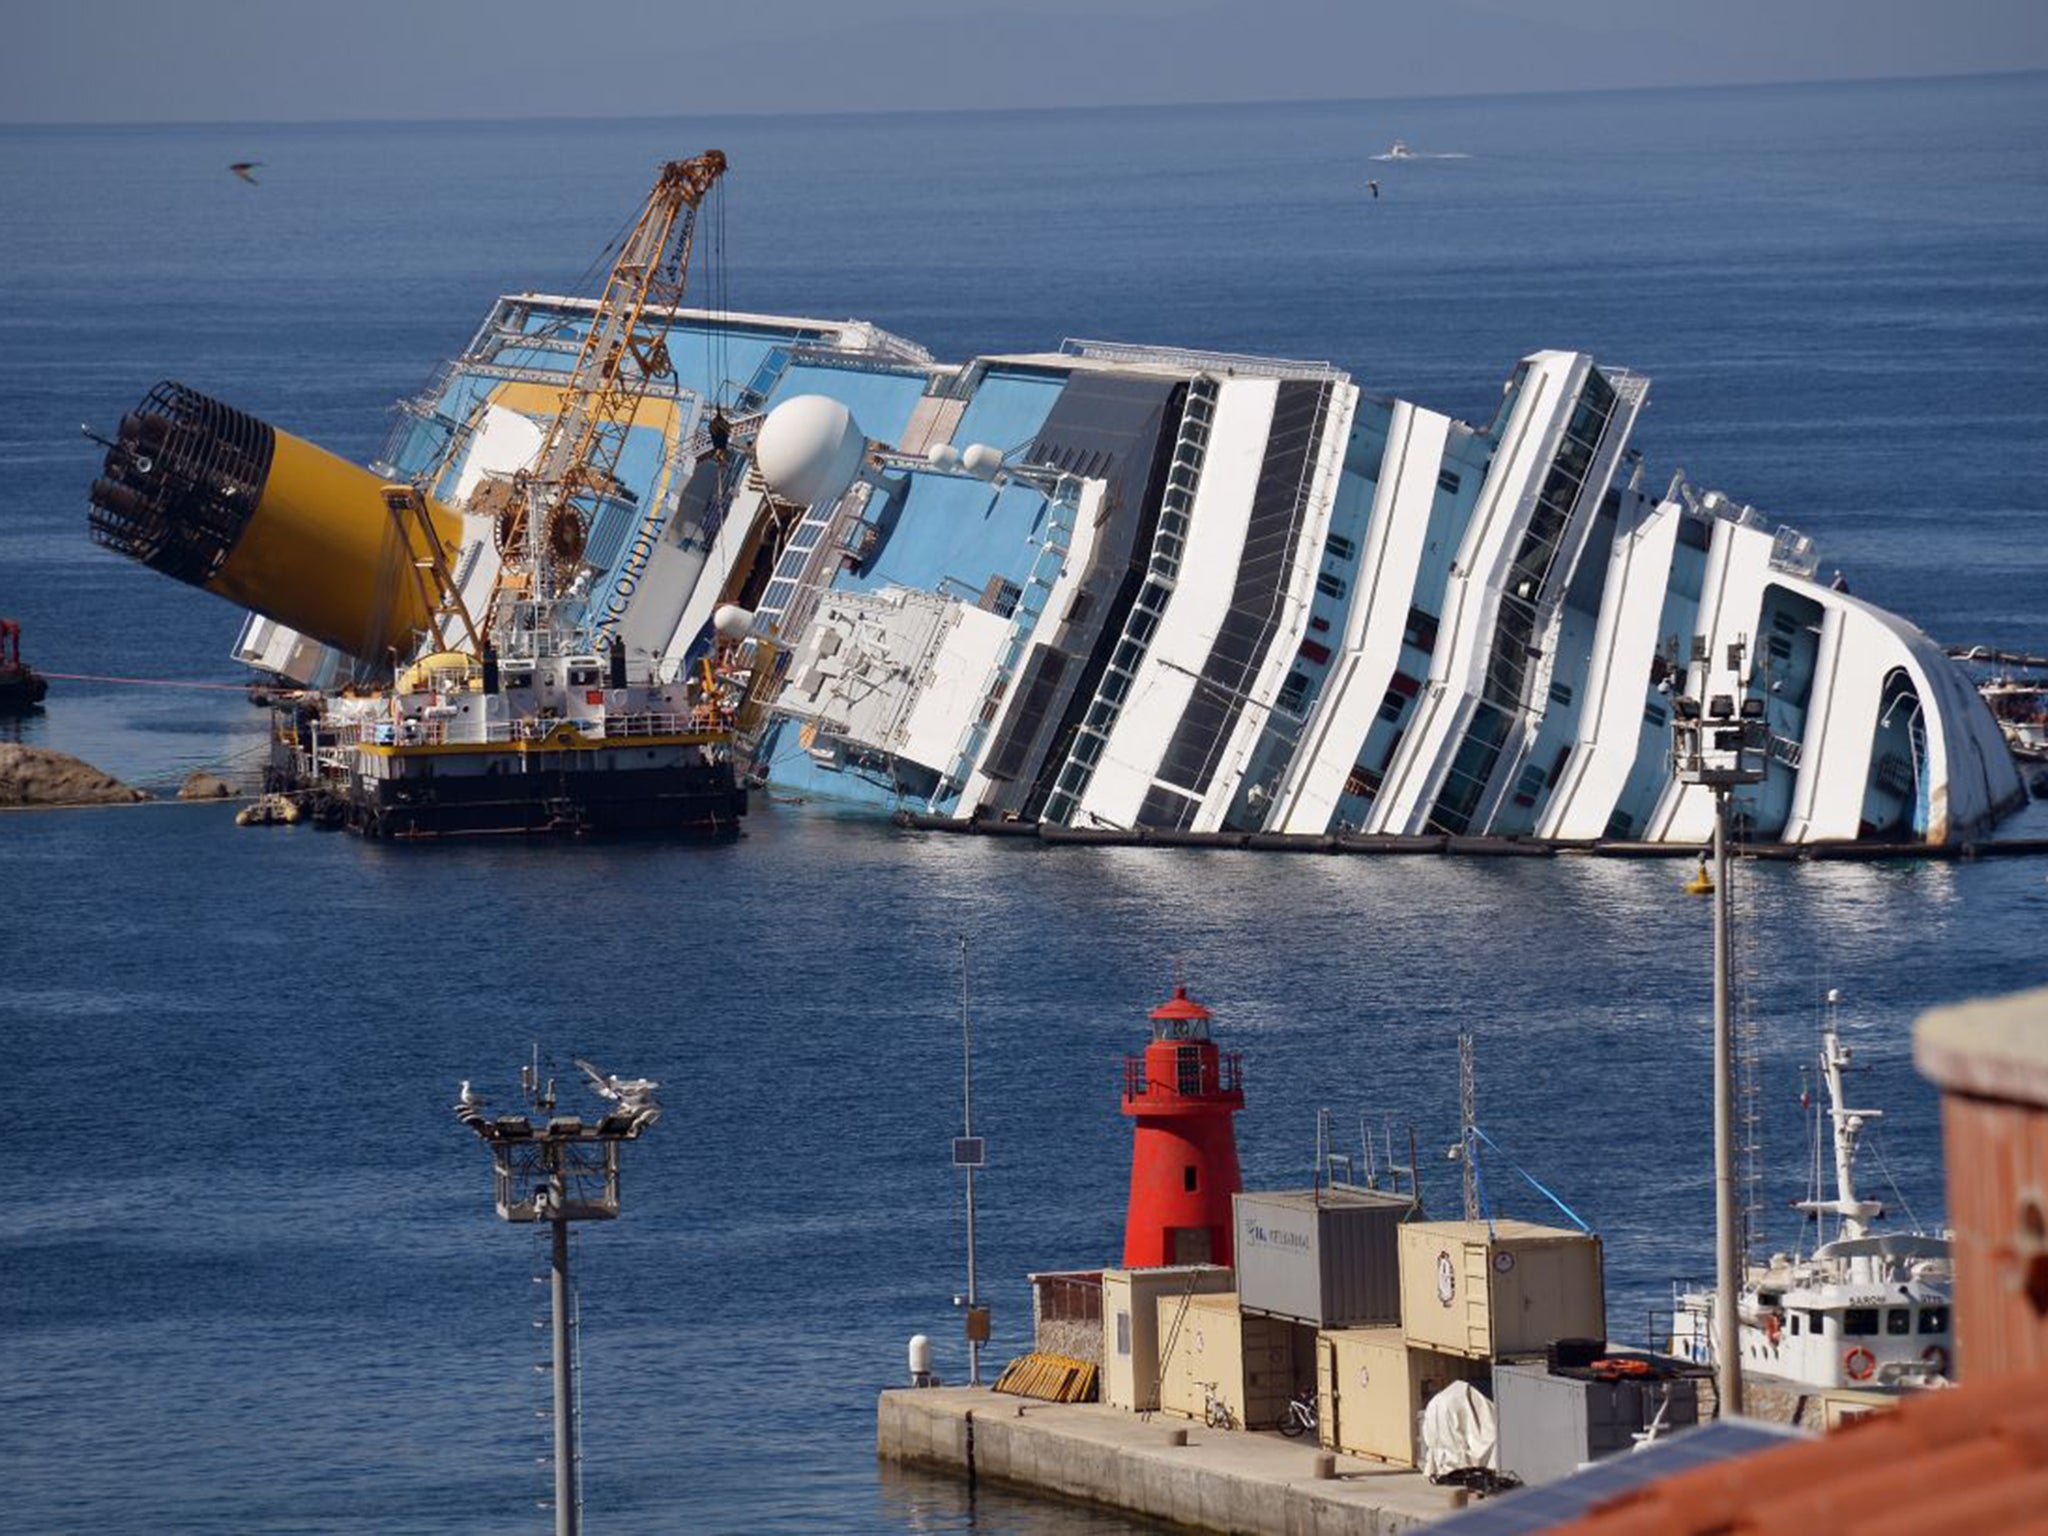 The ‘Costa Concordia’ sank in 2012 with the loss of 32 lives